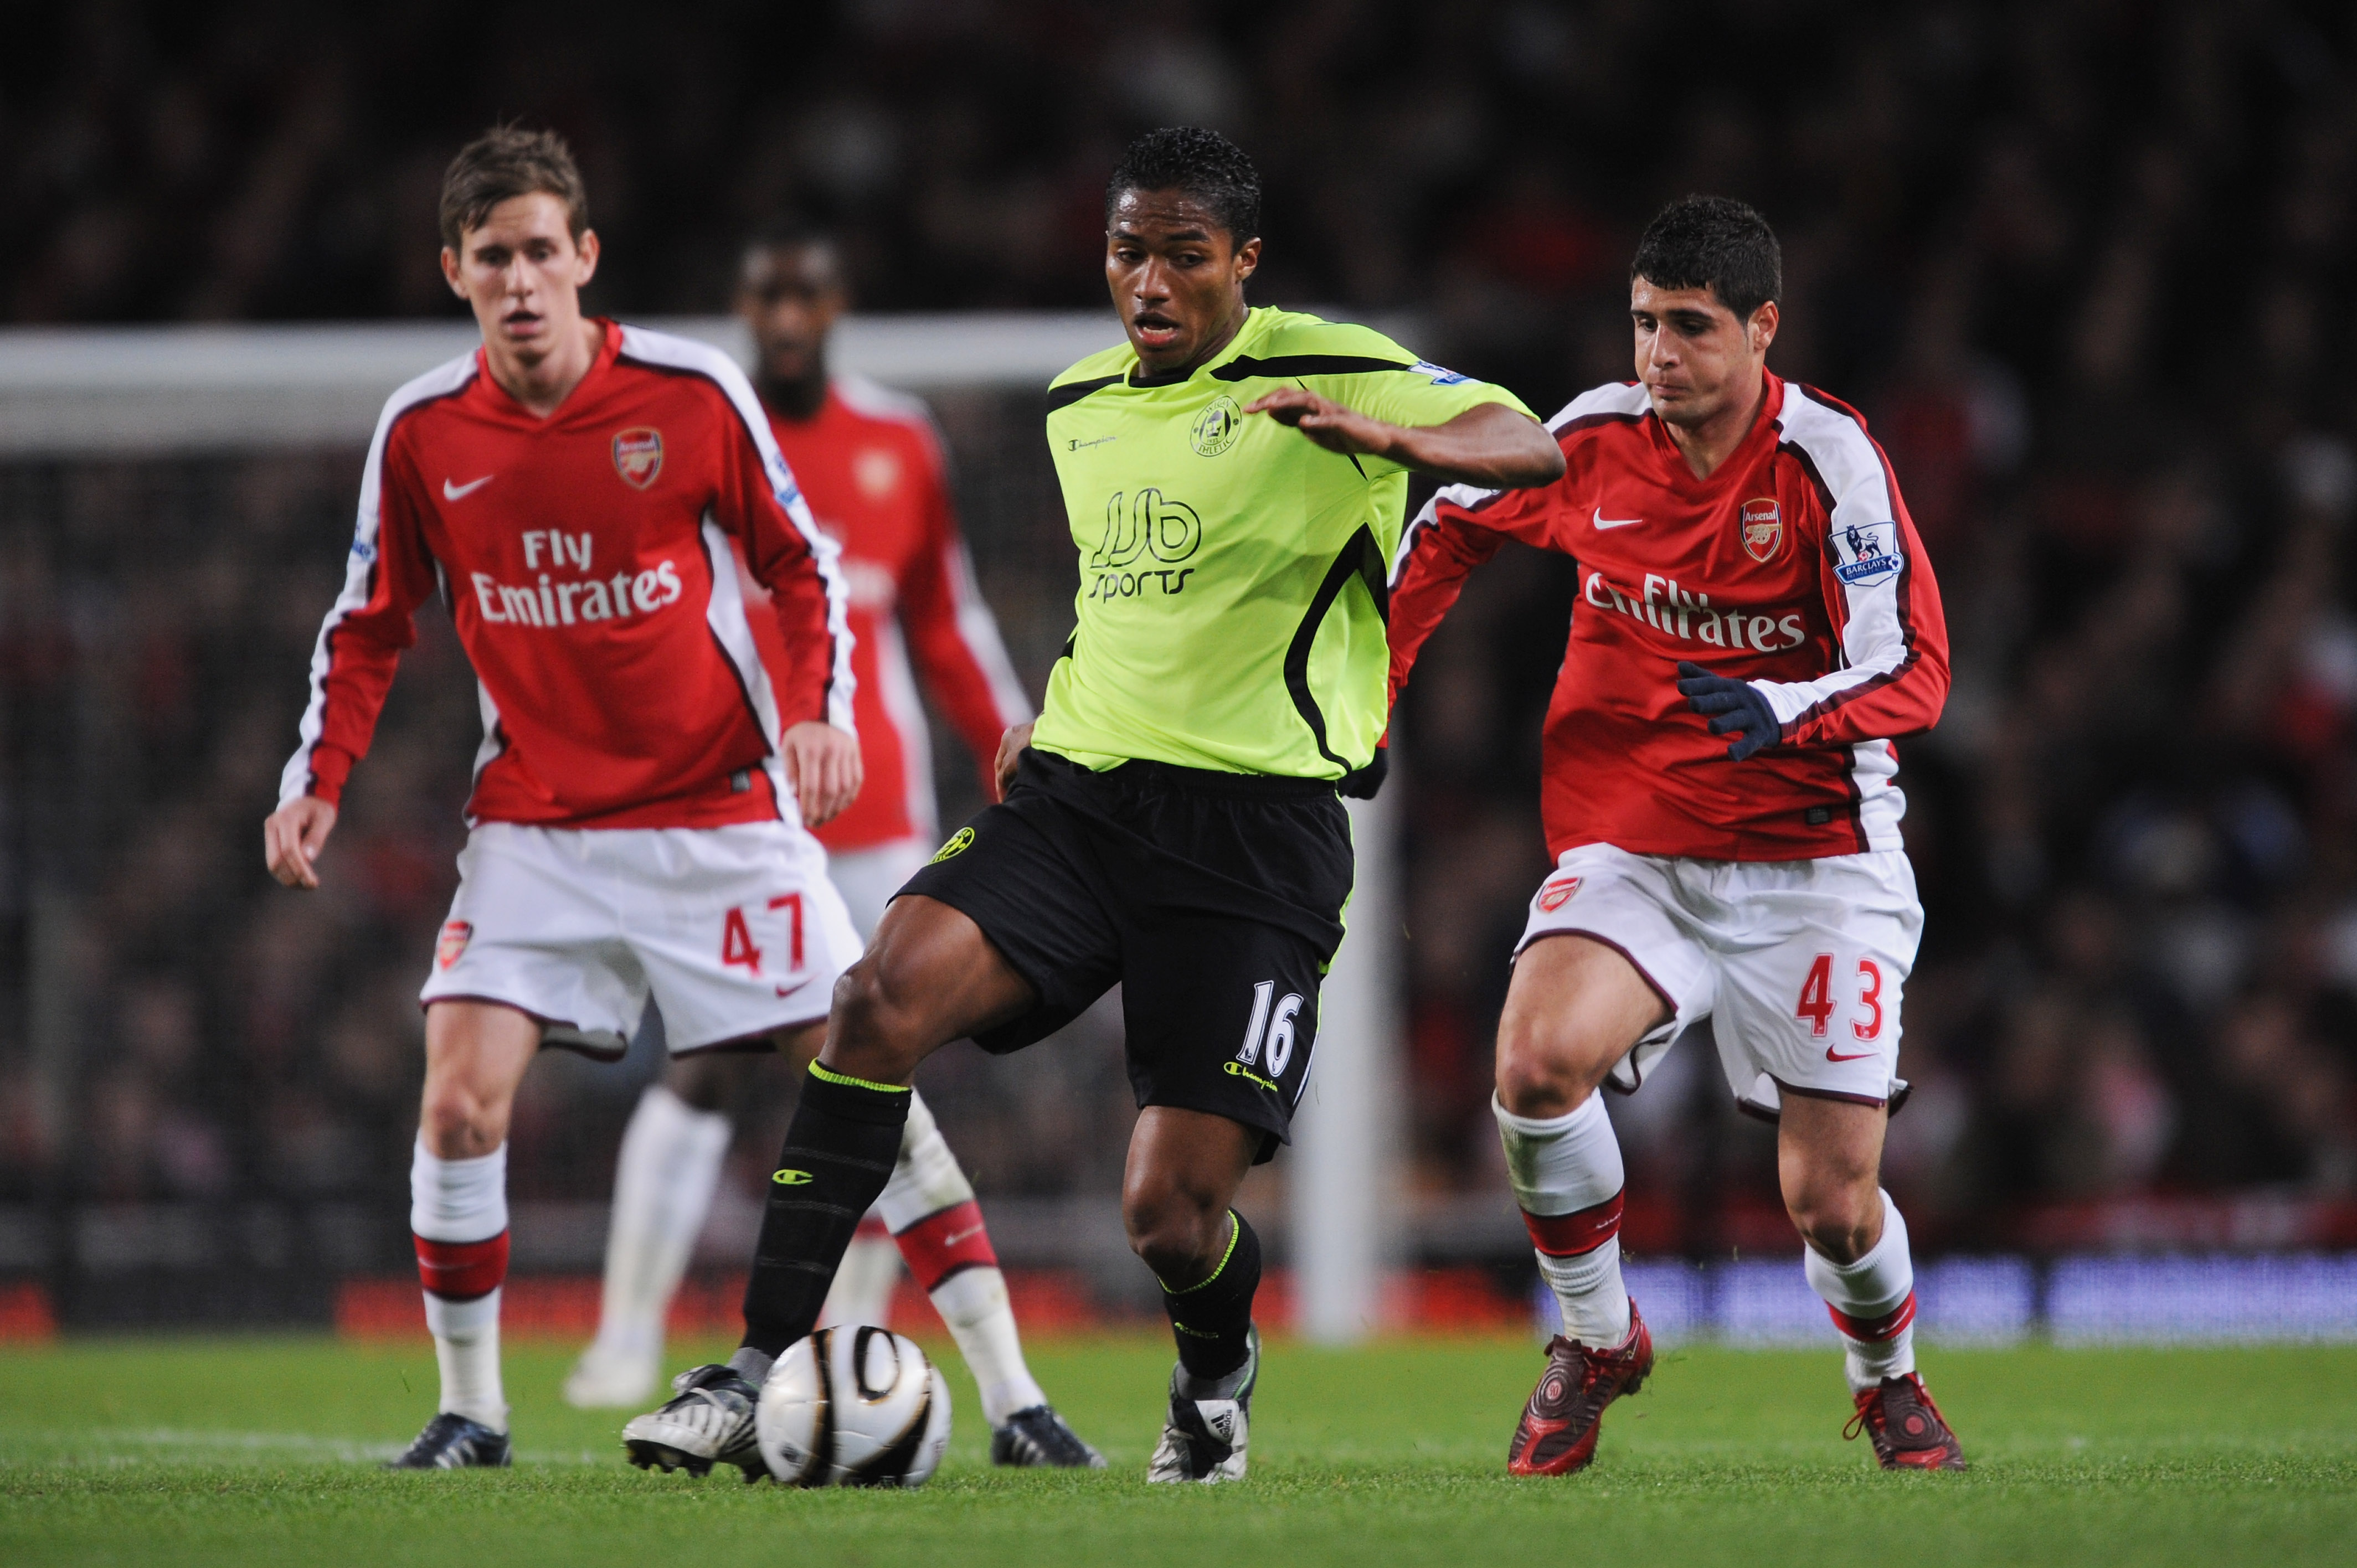 LONDON - NOVEMBER 11:  Antonio Valencia of Wigan is pressurised by Mark Randall  #47 and Fran Merida #43 of Arsenal during the Carling Cup fourth round match between Arsenal and Wigan Athletic at the Emirates Stadium on November 11, 2008 in London, Englan